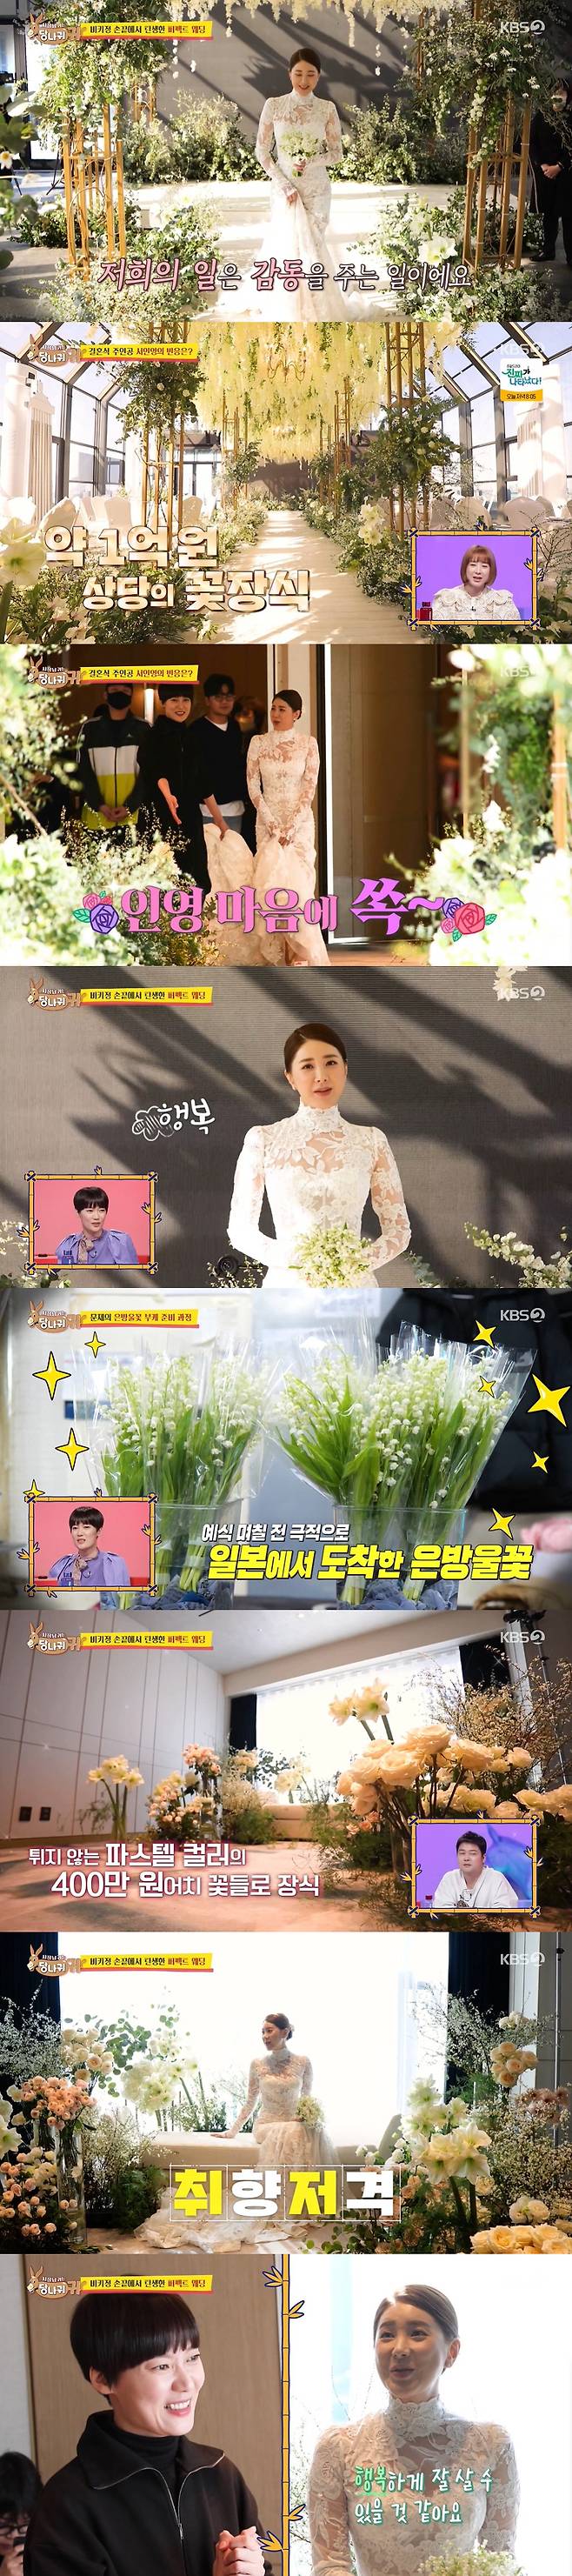 Seo In-youngs marriage ceremony site was unveiled.In KBS2 Boss in the Mirror broadcasted on the 9th, a movie-like marriage ceremony where Seo In-youngs Wedding dress Romang was realized was revealed.The new bride, Seo In-young, said, There is a change in the style of clothes, but Husband is the opposite of me. The tension is not good. When I meet people, the atmosphere changes.He said, I can not get naked like Ye Olden Days because I have Laws. Lee Ji-hye laughed, saying, I liked to take off.When asked about the best part of the marriage, Seo In-young said, I have friends who can eat late-night snacks together, but added, The bad thing is that Im getting fat. I gained 5kg.Seo In-young said, Husband is taking the initiative. Husband says, You win, you have a big voice.There are times when there is not a little Jaesusaeng and laughed.Husband and love are important, but Ive had a baby and Ive been blessed. I hope In-young gets a second generation soon, Lee Ji-hye advised.Seo In-young commented on the second generation, I am thinking about preparing for the second generation.On the other hand, a movie-like marriage ceremony where Seo In-youngs Wedding dress Romang was realized was also revealed.Seo In-young, who appeared in a pure white Wedding dress dress, caught the attention of the cast members with the charisma of Aid Sensei, a gorgeous and elegant new bride charm.Seo In-young, who has been escorted by Miss Vicki, who oversees the design of the wedding dress event, has a romantic atmosphere with flower decorations worth about 100 million won and flower hangings made of 3000 flowers. Here is a galaxy full of chandelier and flowers. Looking around the Wedding dress hall, which seems to have moved the set of the movie Twilight as it is, I just wanted it.I think I can take a movie, admiration.In particular, Seo In-young, who had a silver droplet flower bouquet in his hand, was overwhelmed by the best Wedding dress that all of his dreams had come true.The bride waiting room is decorated with flowers of 4 million won in pastel color that does not bounce, and Seo In-young was impressed that marriage ceremony is perfect and I can live happier.